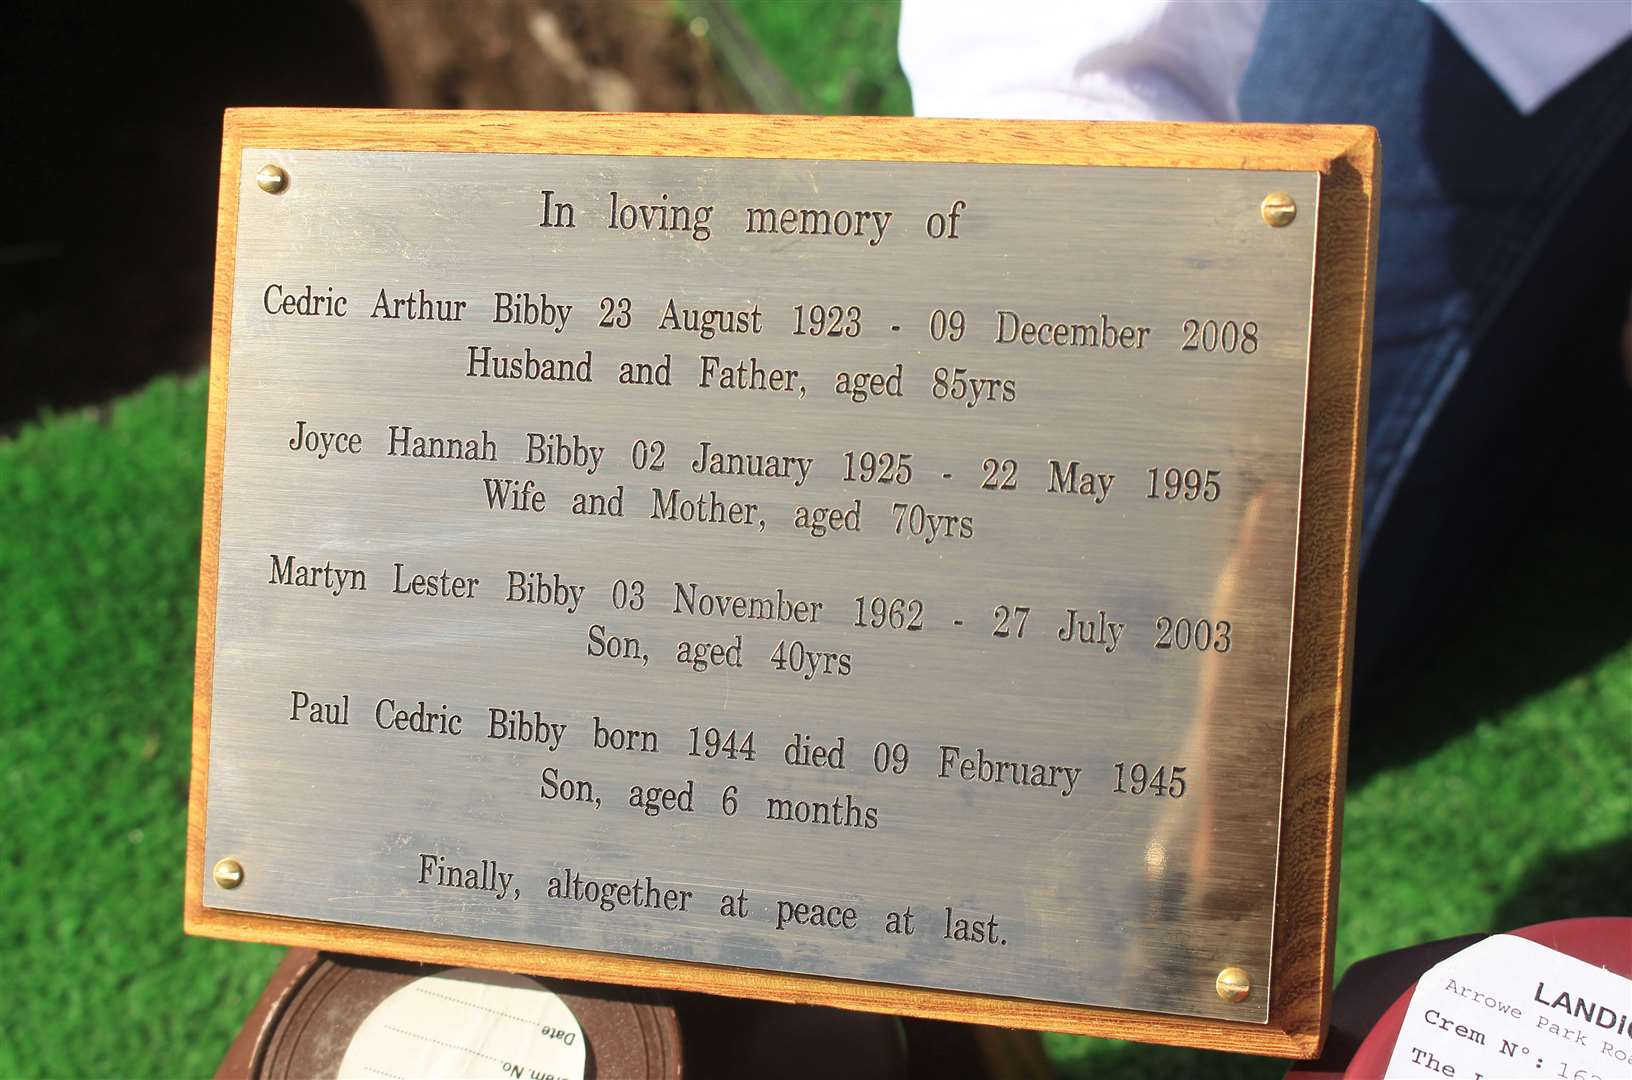 The plaque engraved with the names of Cedric, Joyce, Martyn and baby Paul.